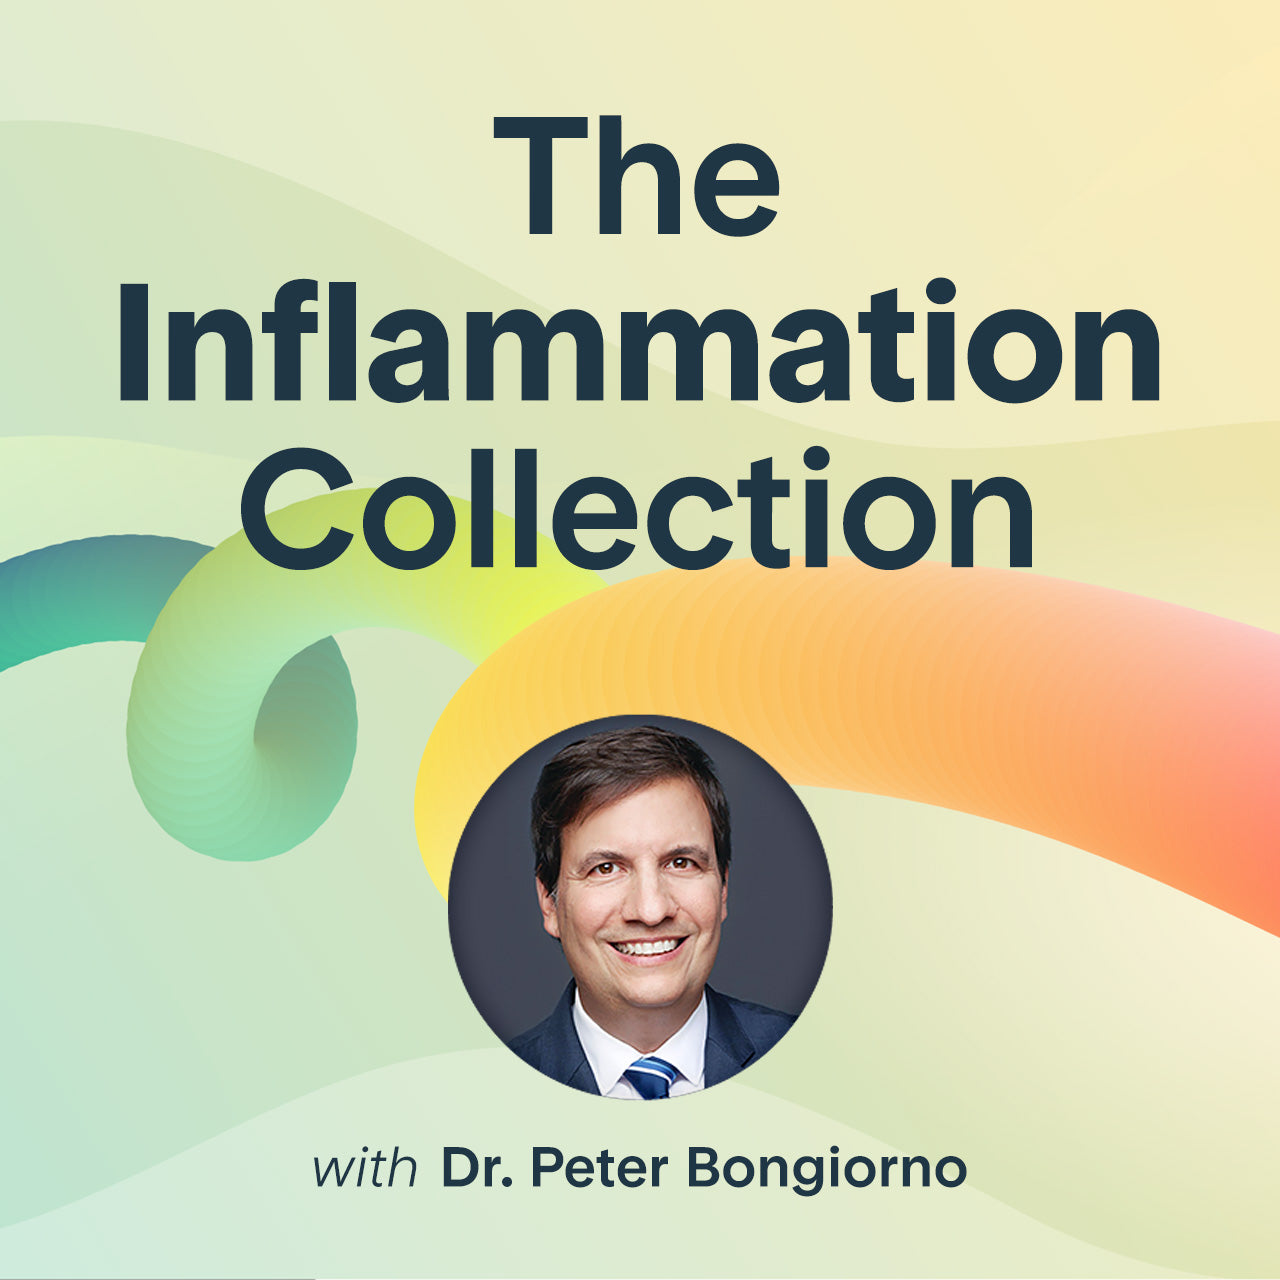 The Inflammation Collection